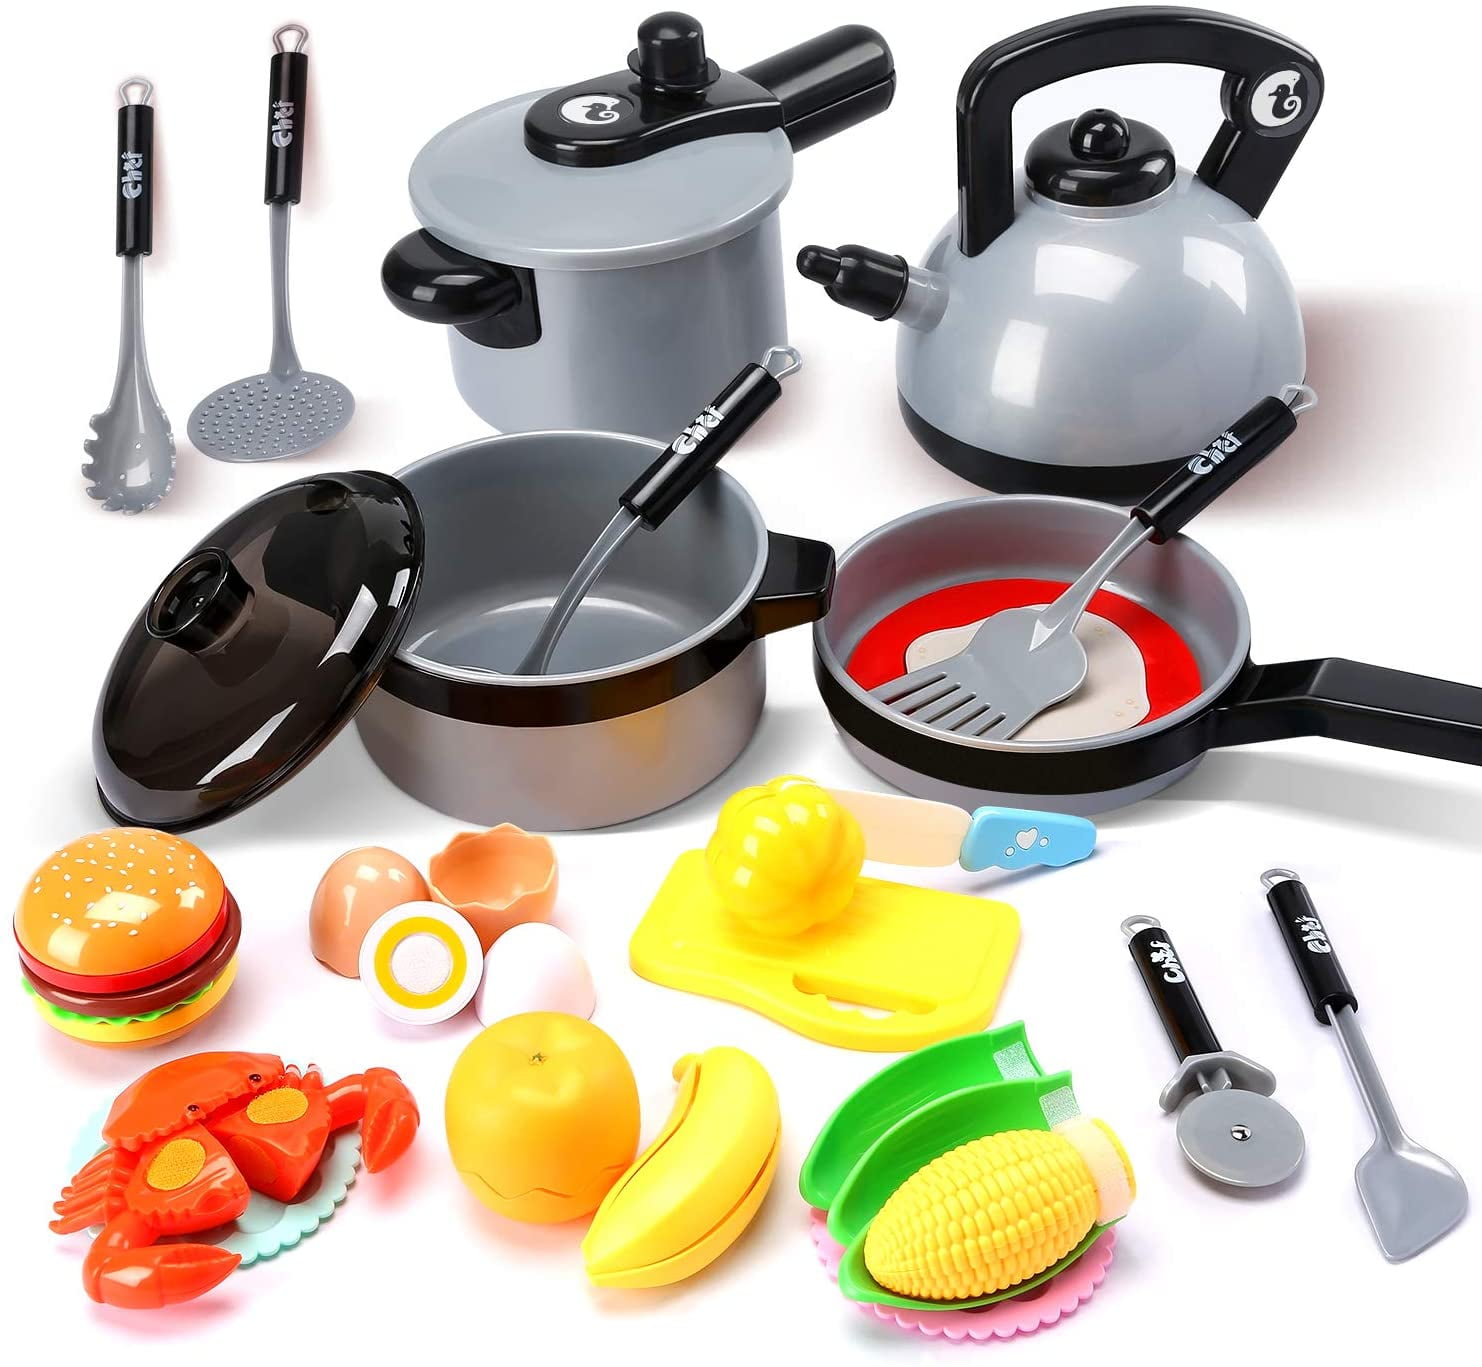 Details about   Children Kids Kitchen Utensils Pots Pans Play Toys Dishes Food Cook Cookin F5V8 